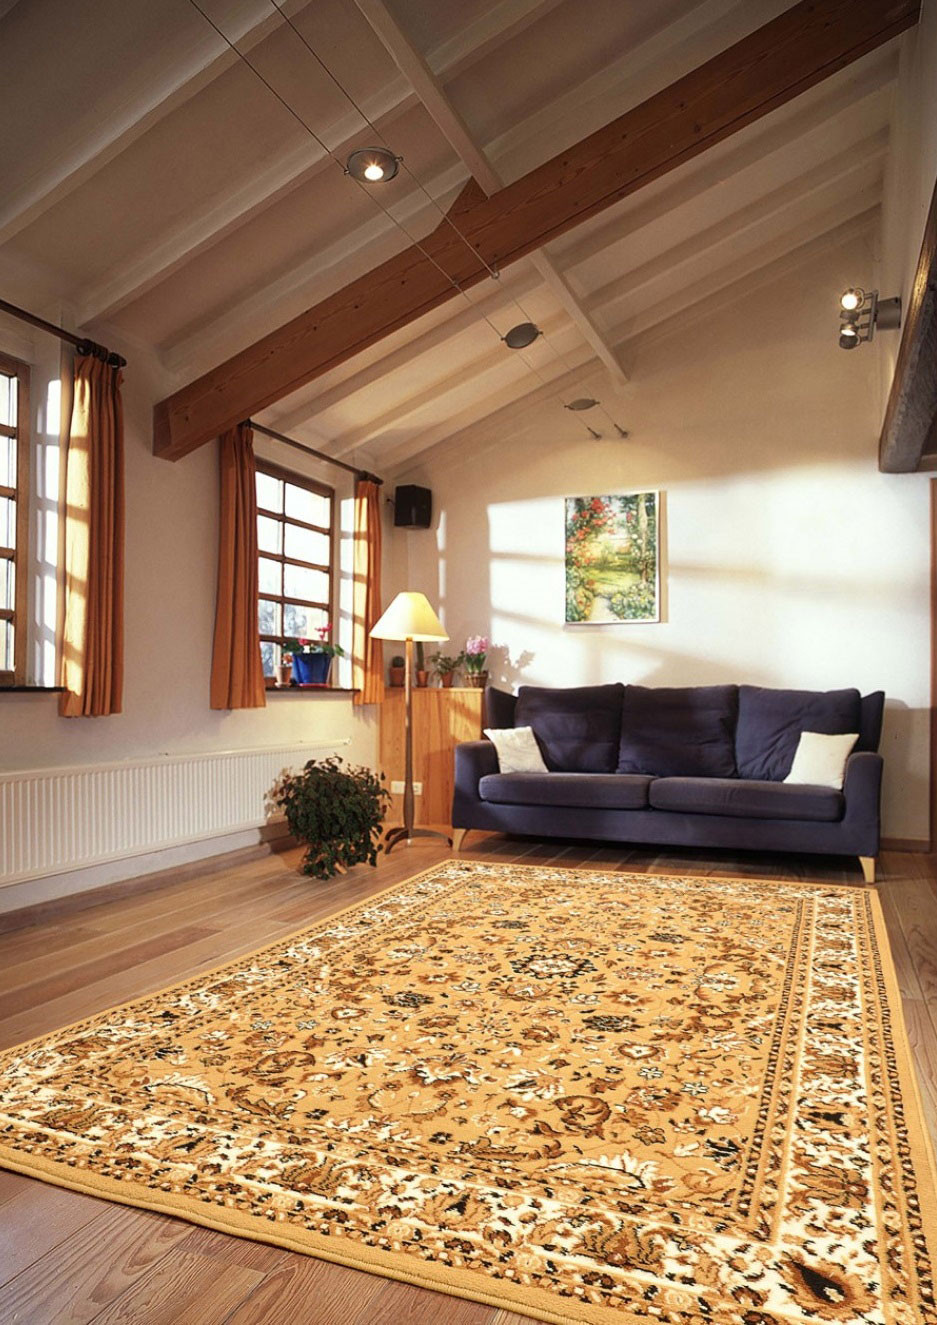 Traditional Rugs For Living Room
 Contemporary Area Rugs with a Patterned Wooly Material to